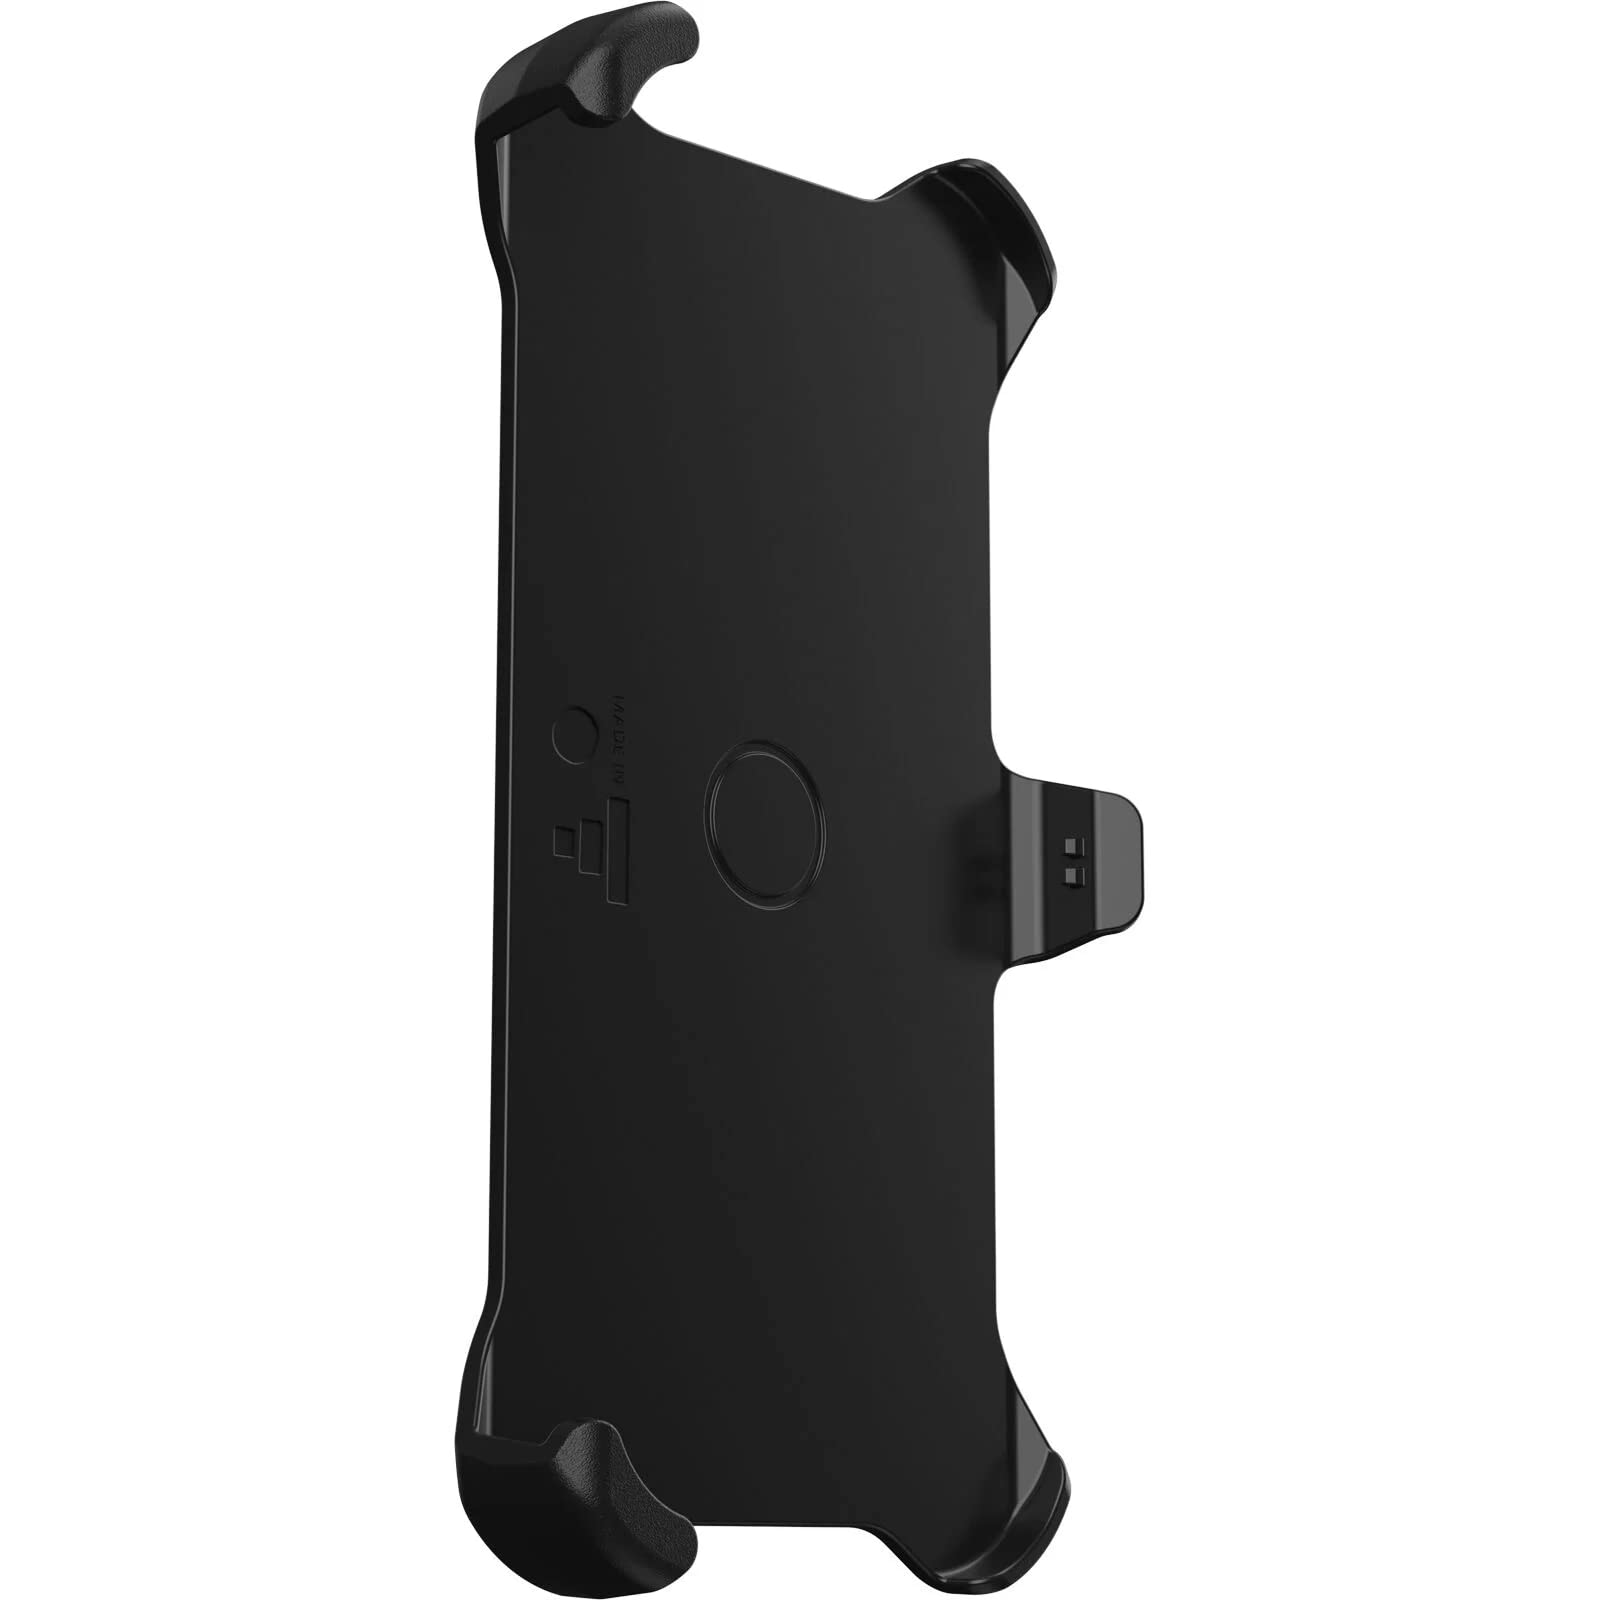 OtterBox Defender Series Holster Belt Clip Replacement for iPhone 13 Pro Max & iPhone 12 Pro Max (Only) - Non-Retail Packaging - Black